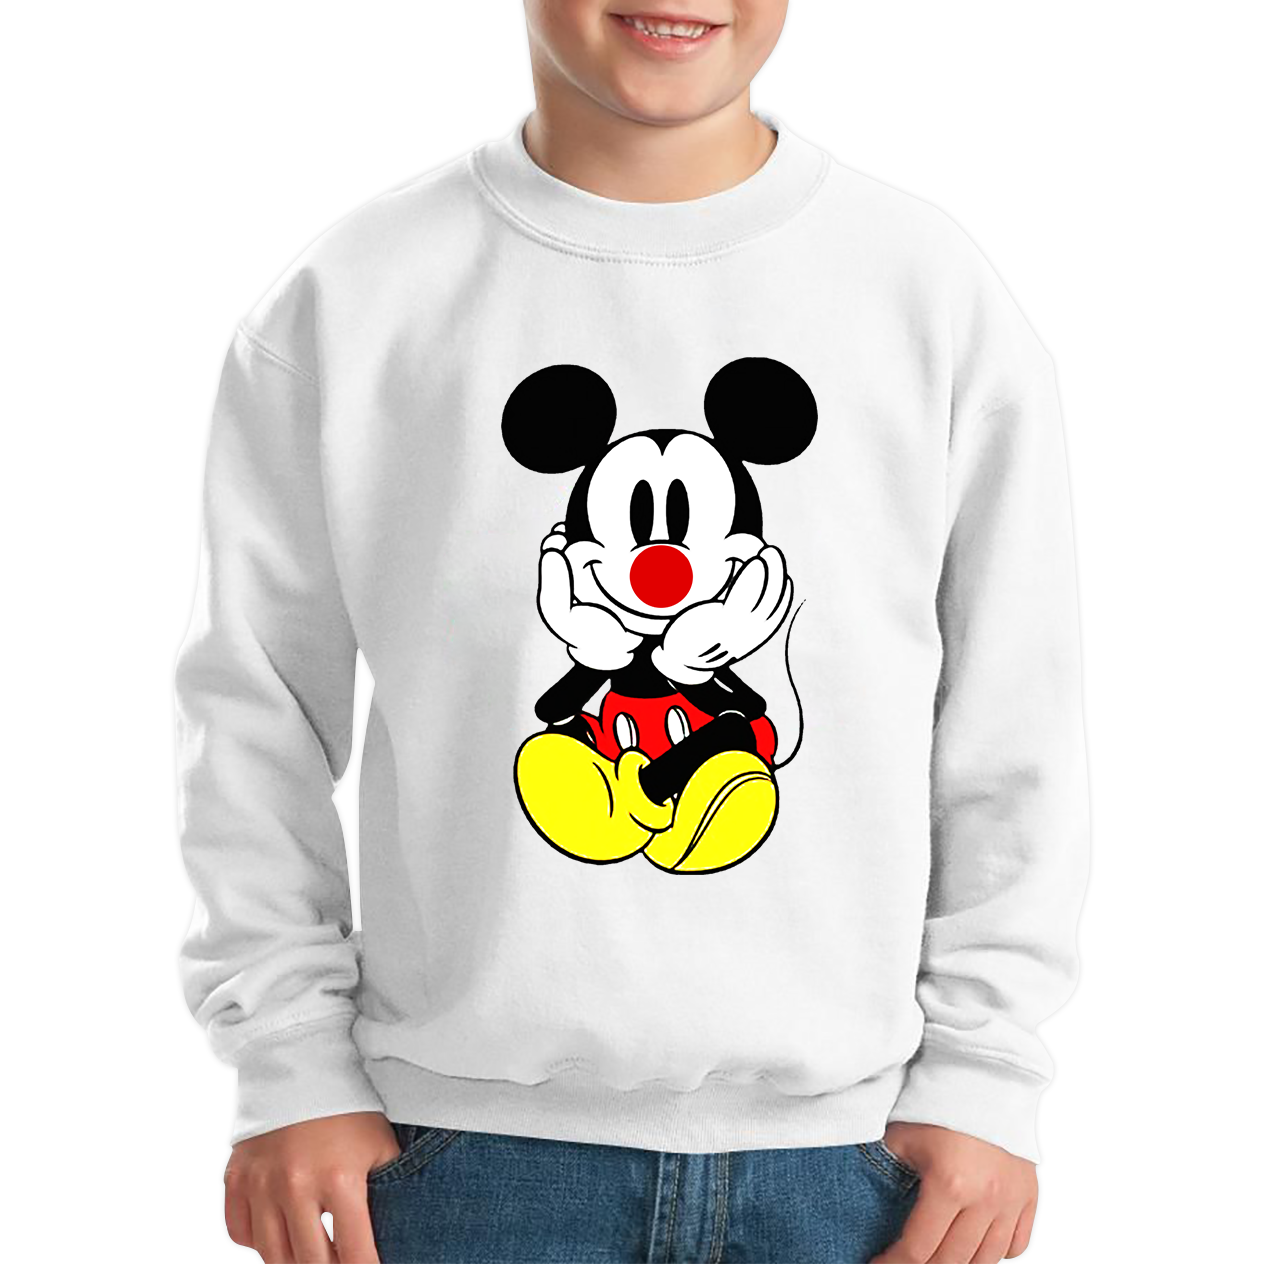 Mickey Mouse Red Nose Day Kids Sweatshirt. 50% Goes To Charity